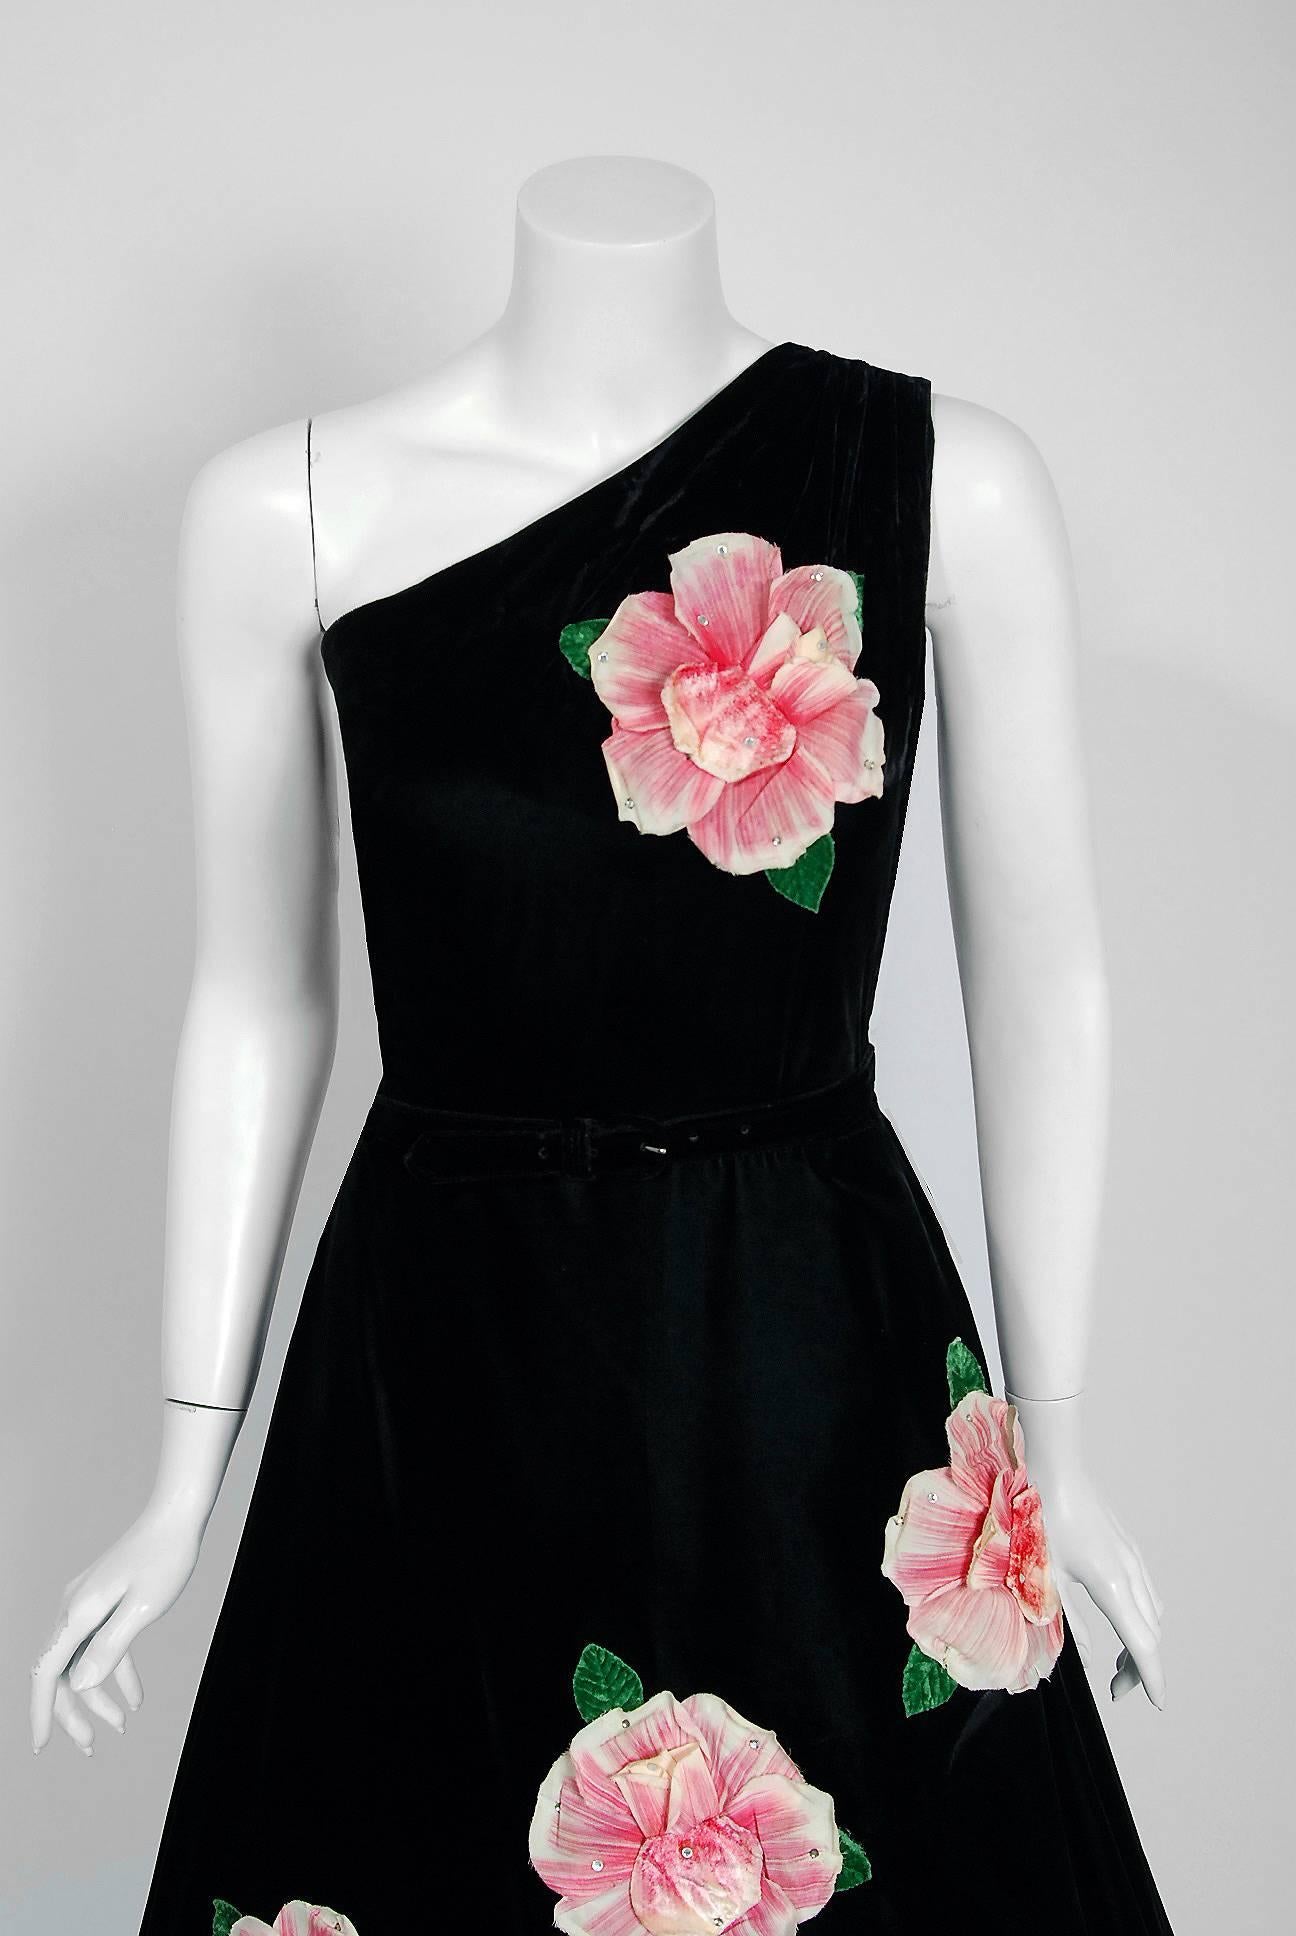 This is perhaps one of the most alluring and flattering little black dresses I have ever seen! Fashioned from soft silk-velvet, this creation has everything a woman wants. The bodice is an elegant asymmetric one-shoulder sleeveless design with